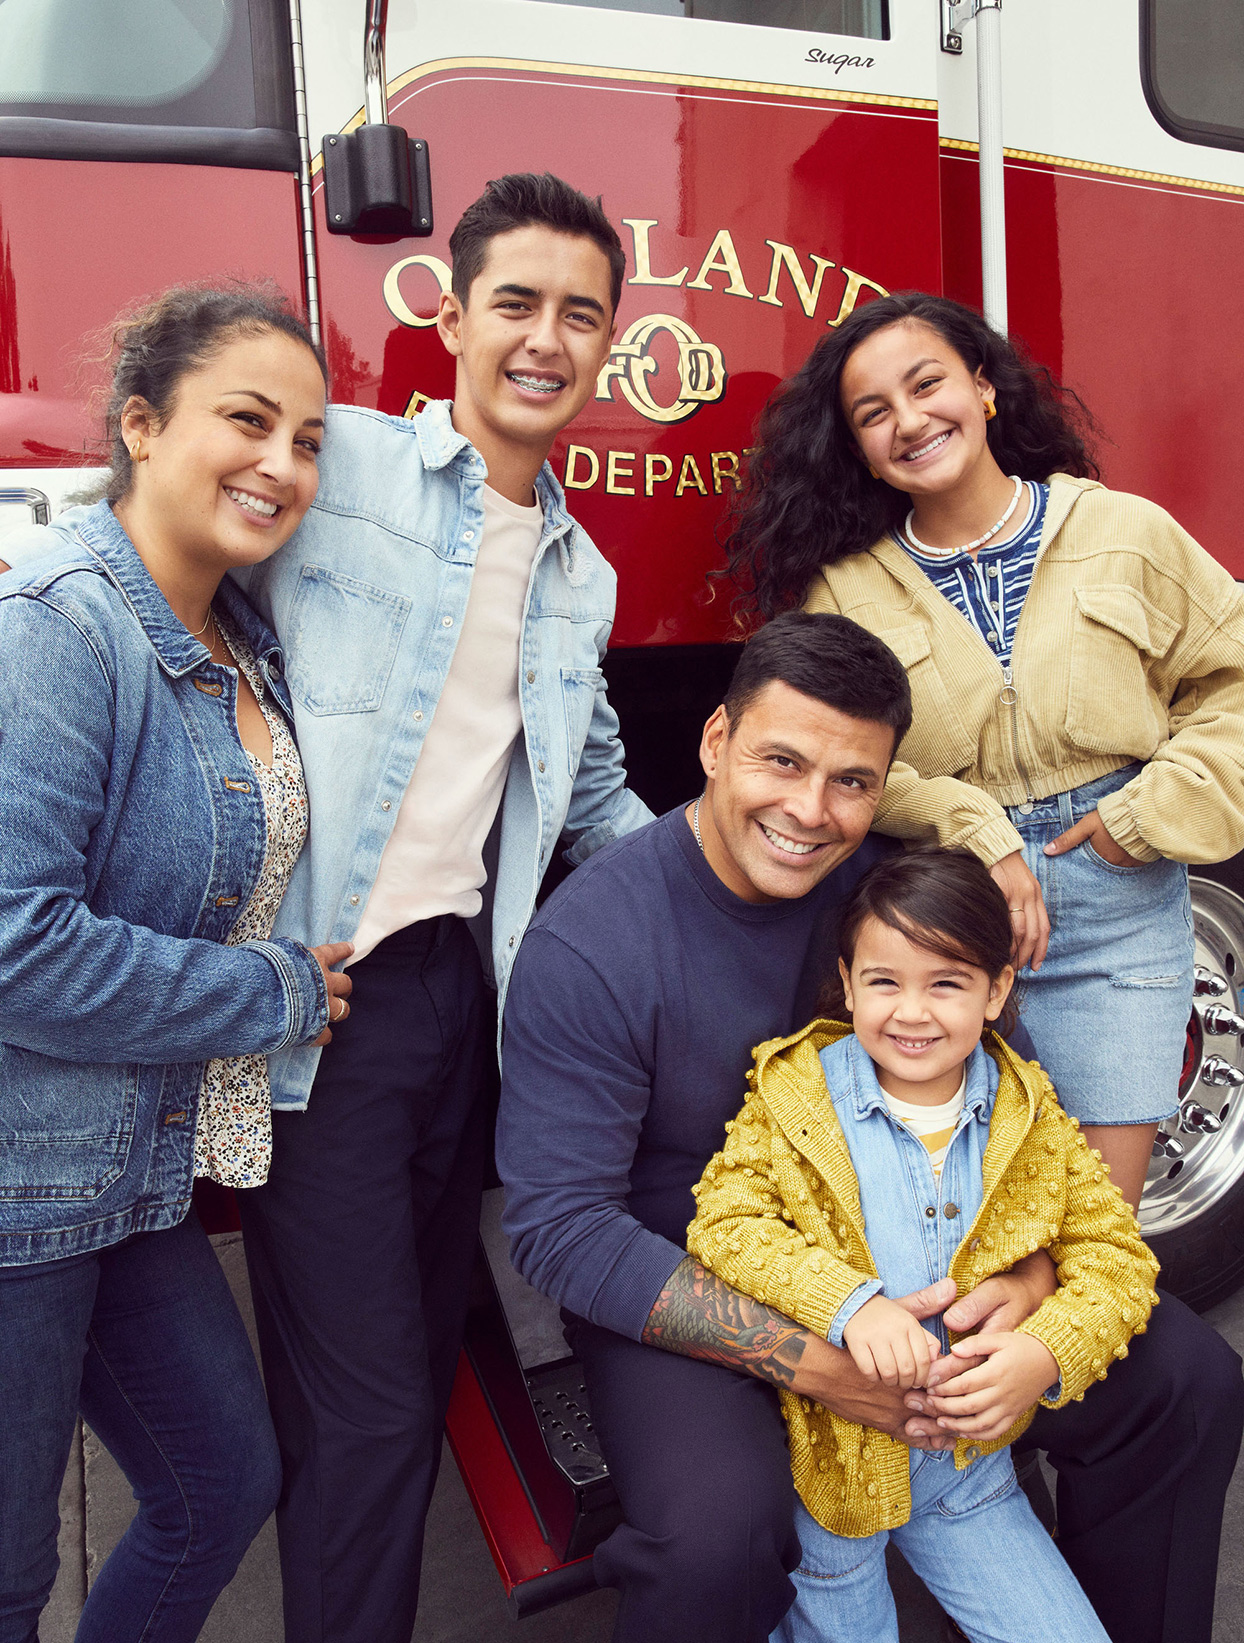 father and firefighter Luis Licea with family near firetruck